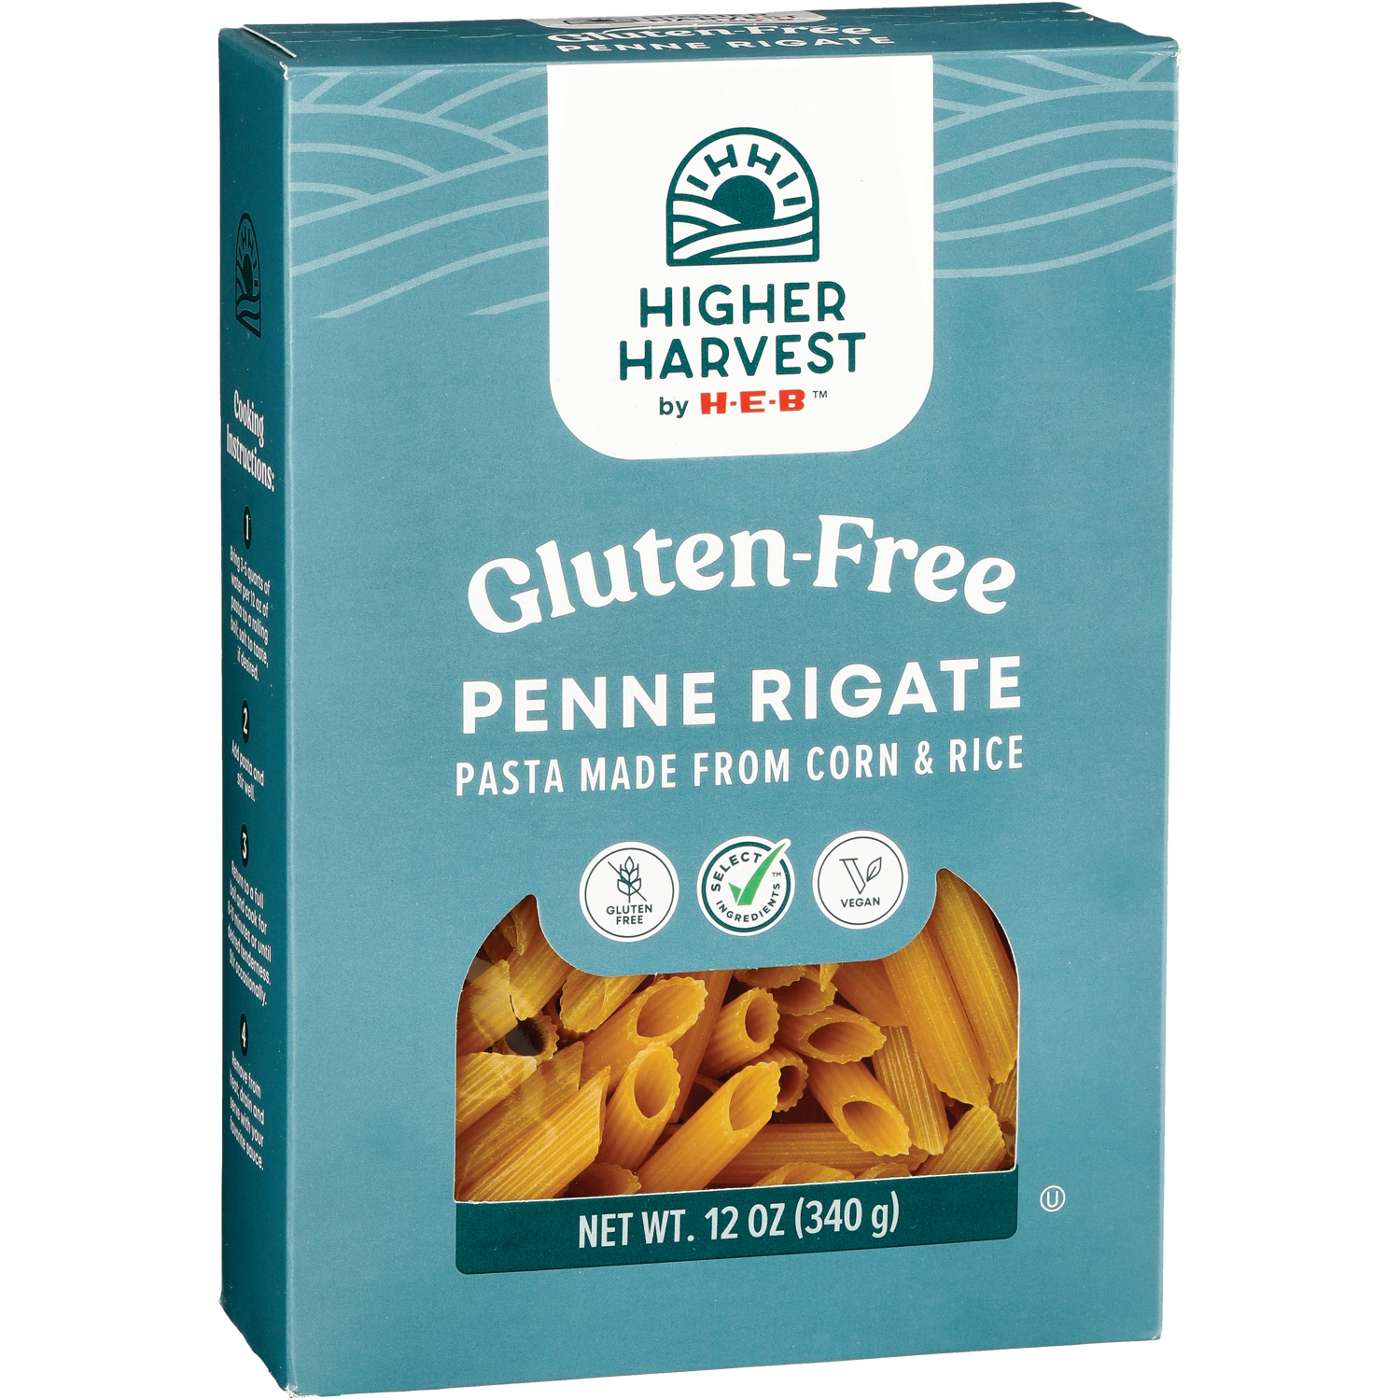 Higher Harvest by H-E-B Gluten-Free Penne Rigate Pasta Noodles; image 3 of 3